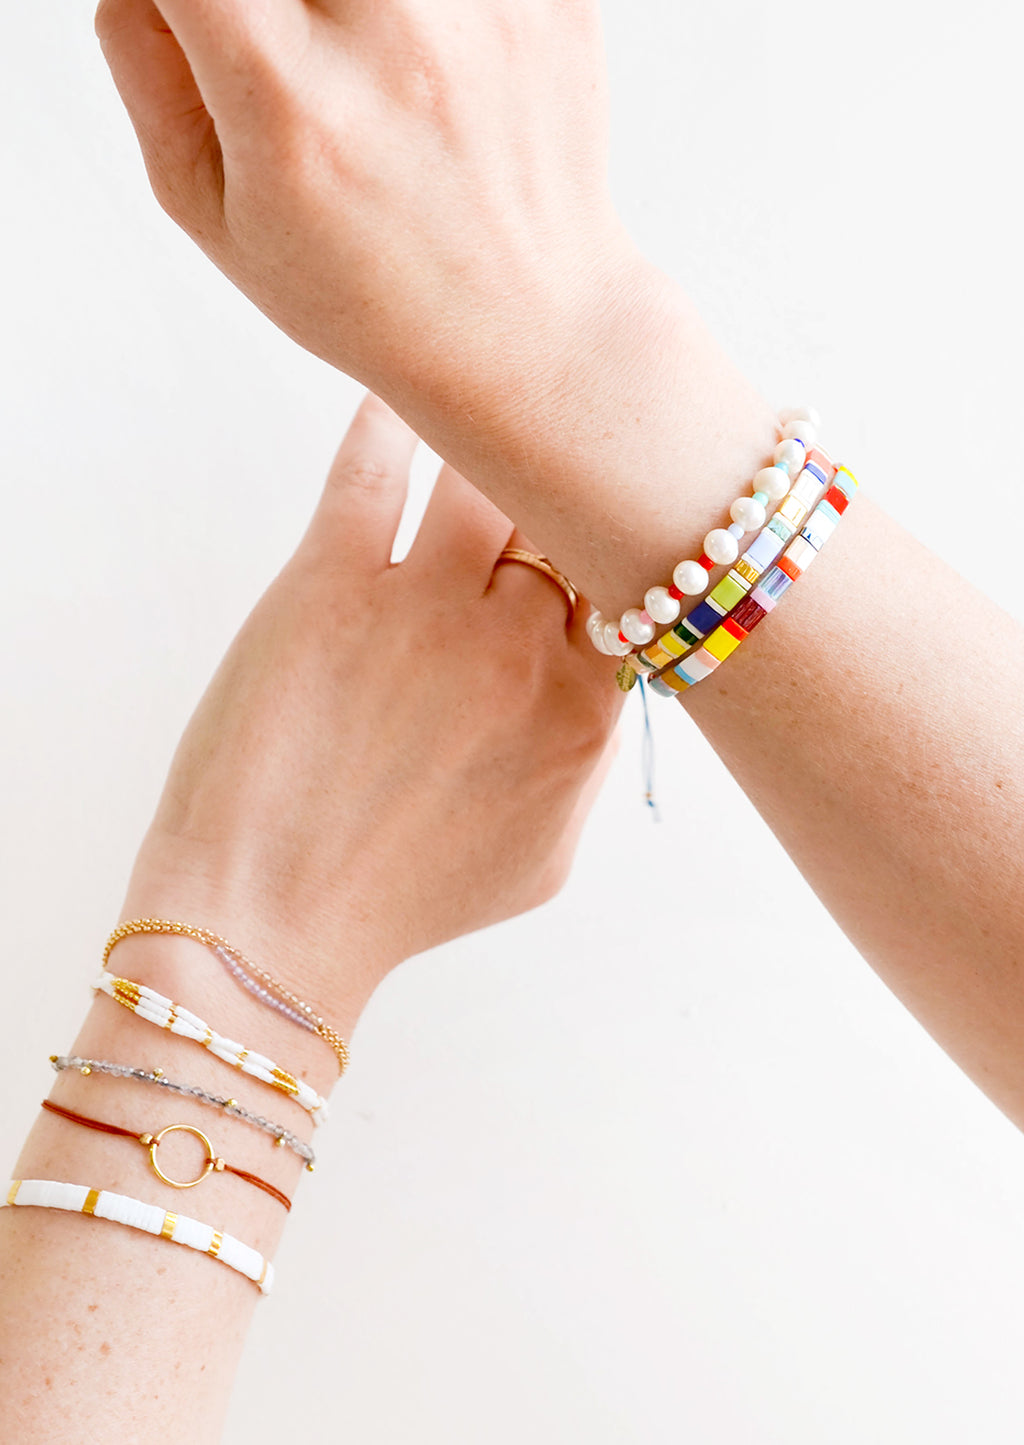 2: A woman's hands crossed with her wrists featuring many different bracelets.